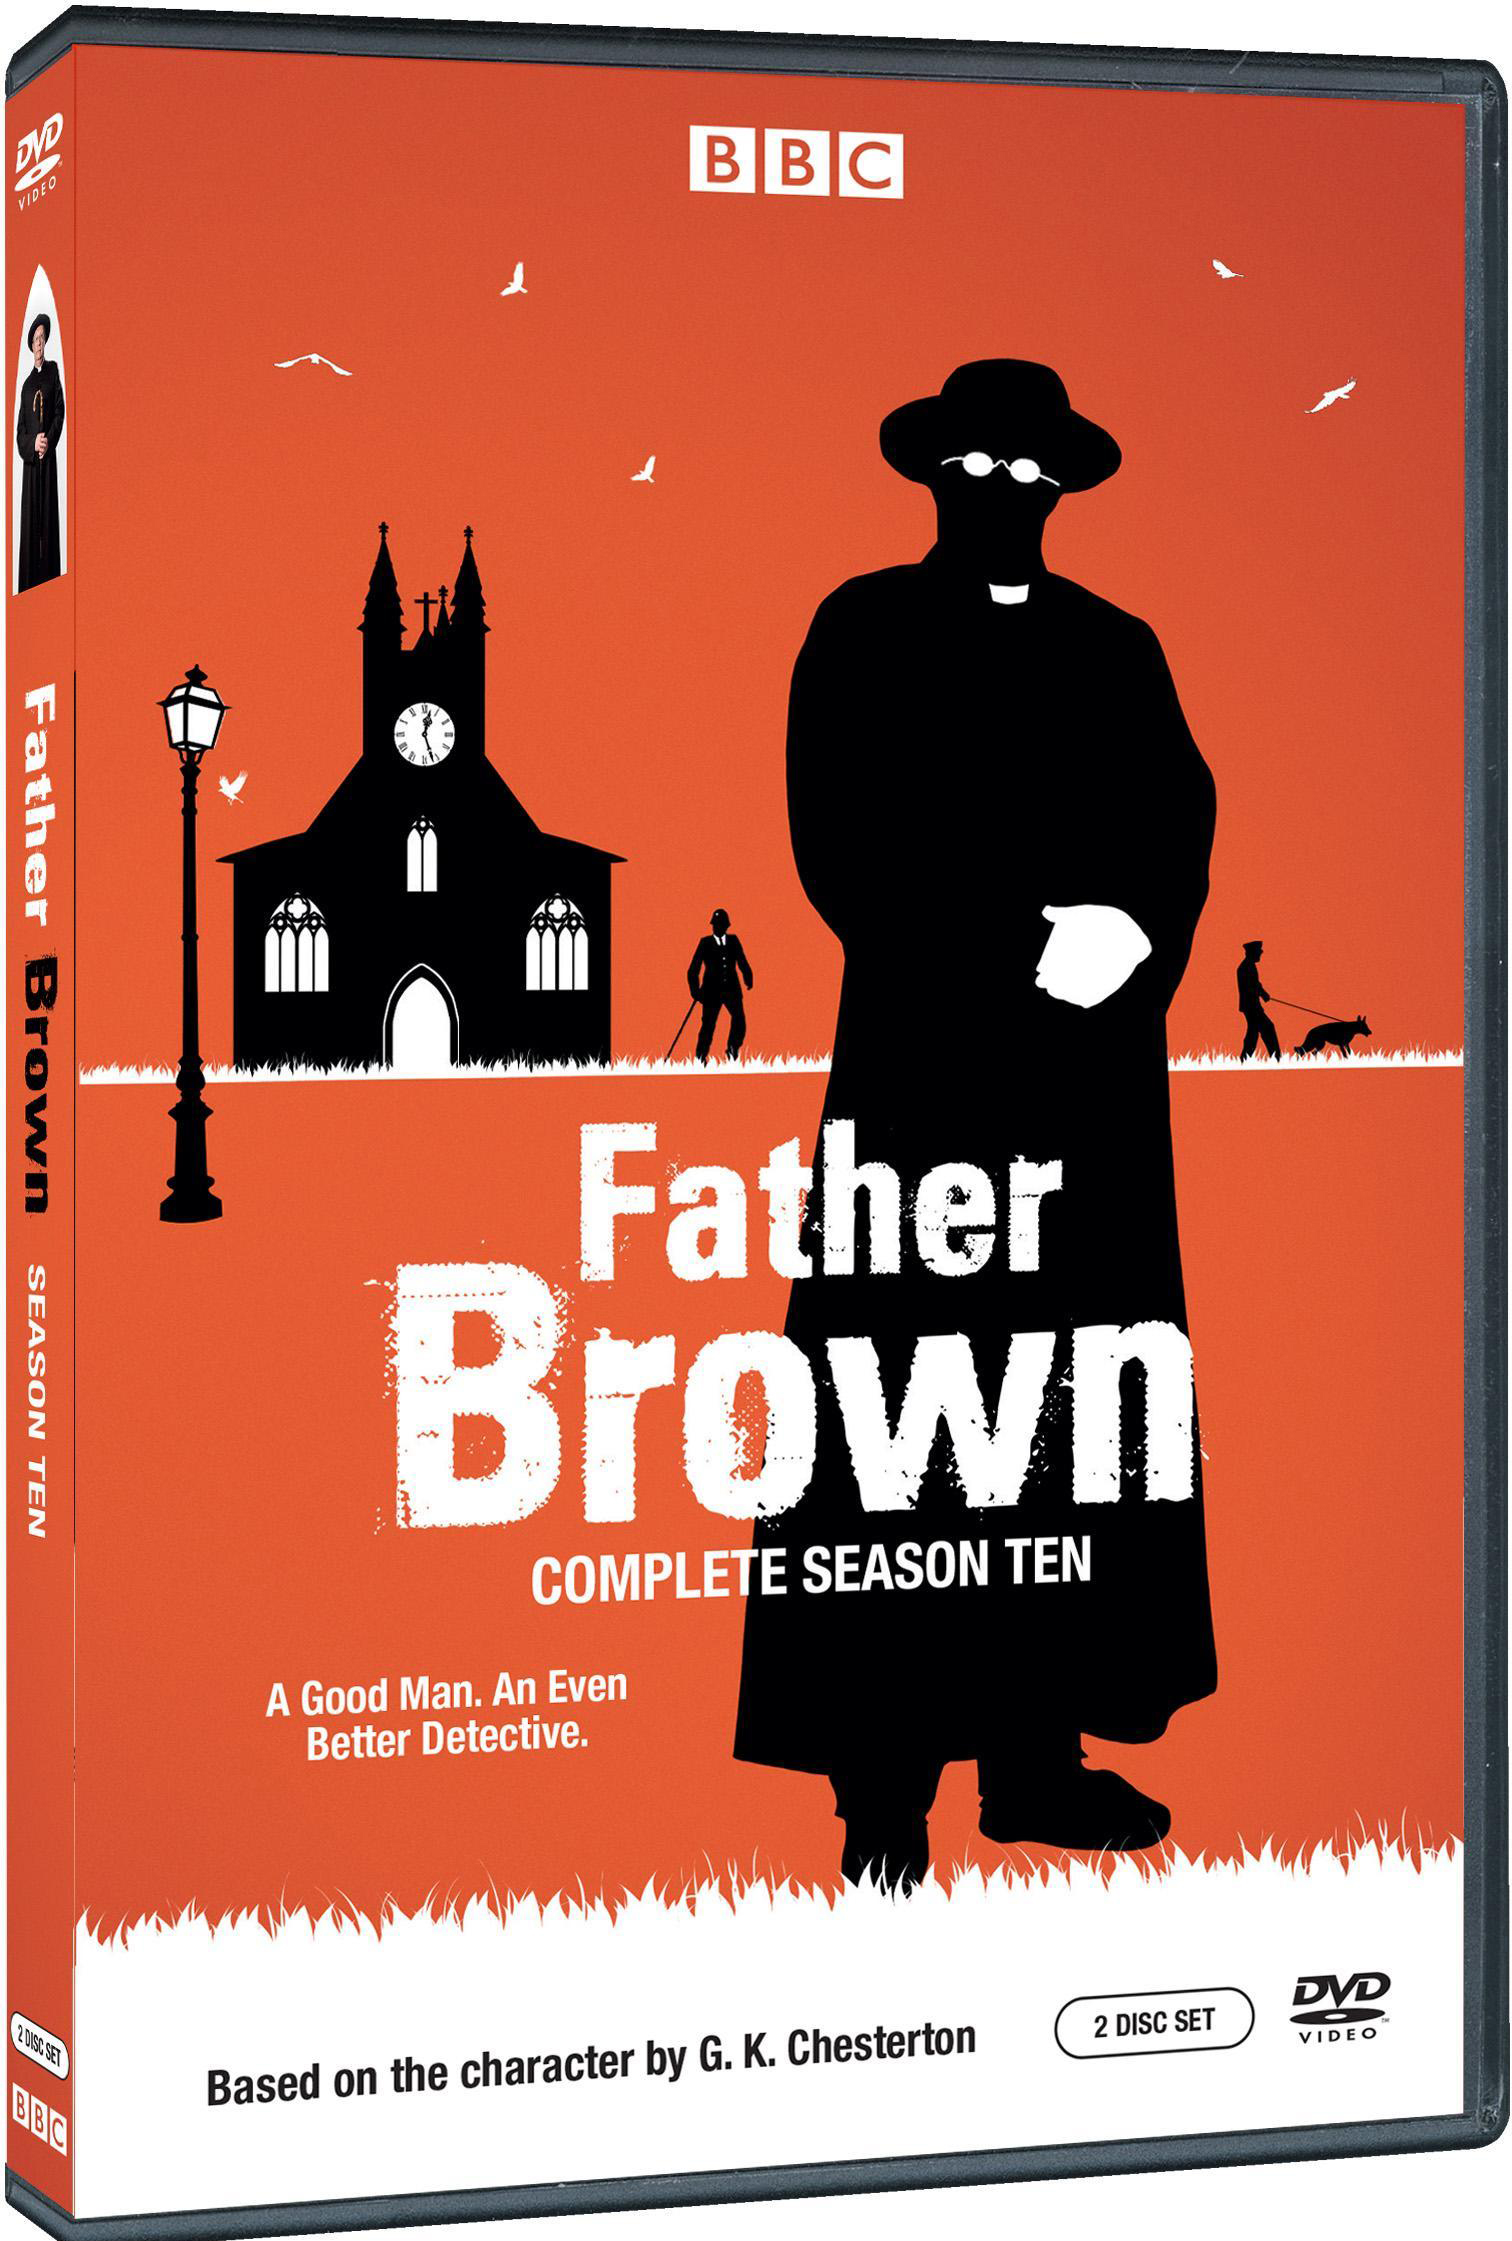 Father Brown: Complete Season Ten (DVD) - image 2 of 3